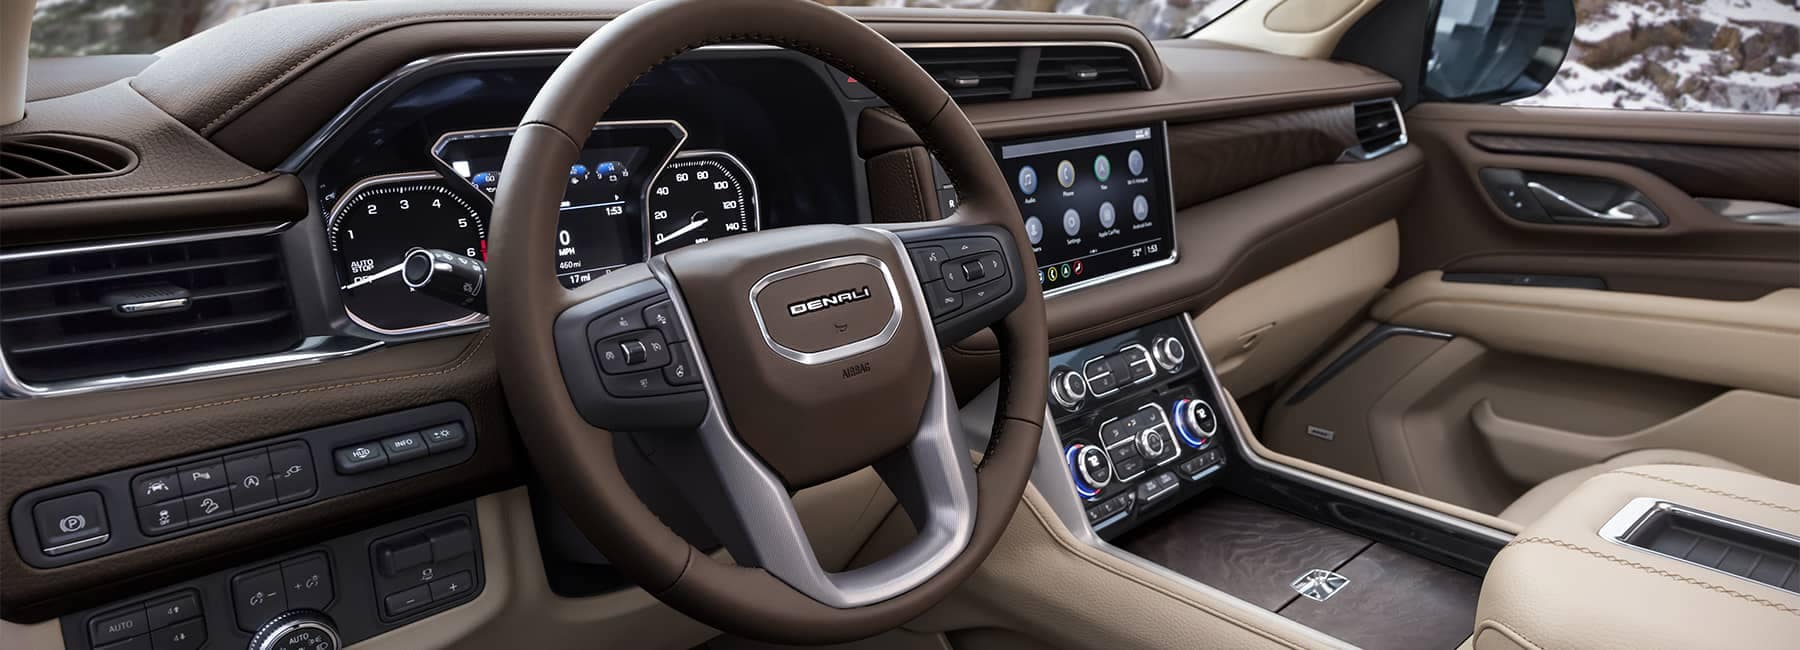 2021 GMC Denali Interior in brown and tan leather